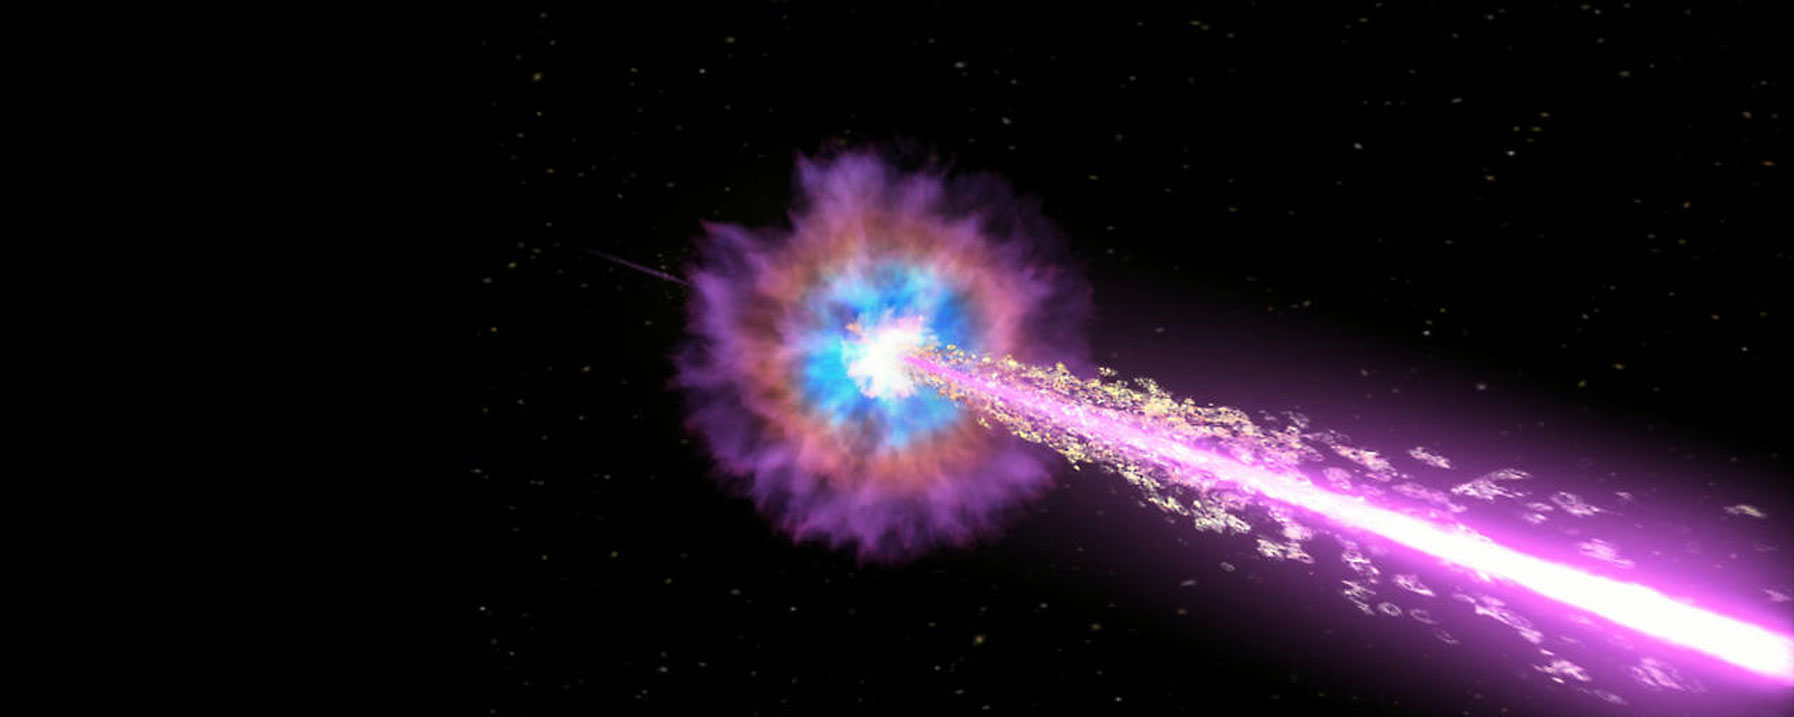 In this illustration, the black hole drives powerful jets of particles traveling near the speed of light. The jets pierce through the star, emitting X-rays and gamma rays as they stream into space.